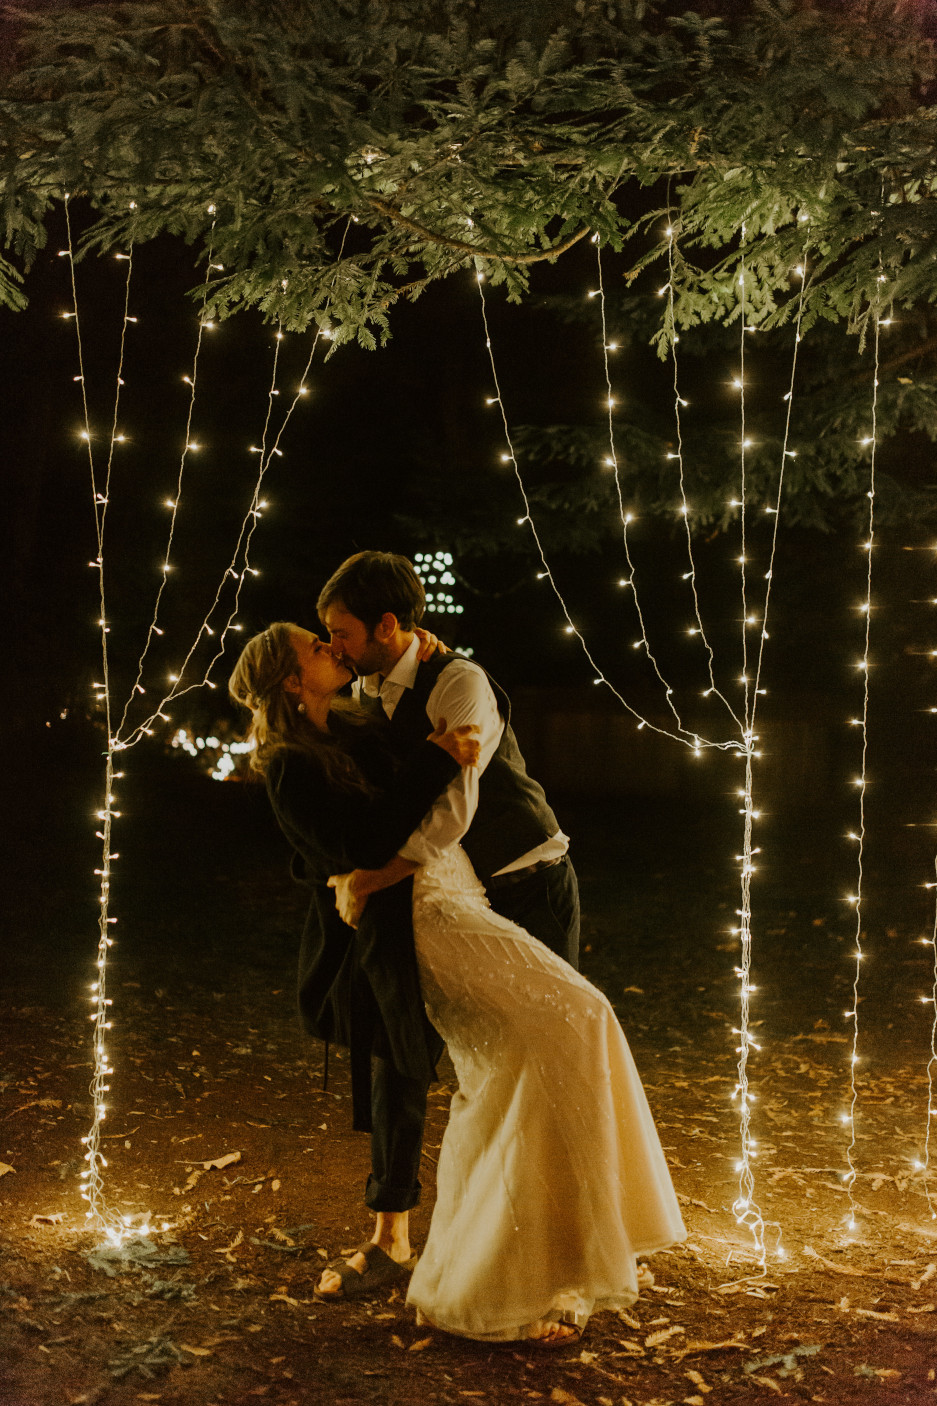 Hannah and Dan kiss in front of lights in Corvallis, Oregon. Intimate wedding photography in Corvallis Oregon by Sienna Plus Josh.